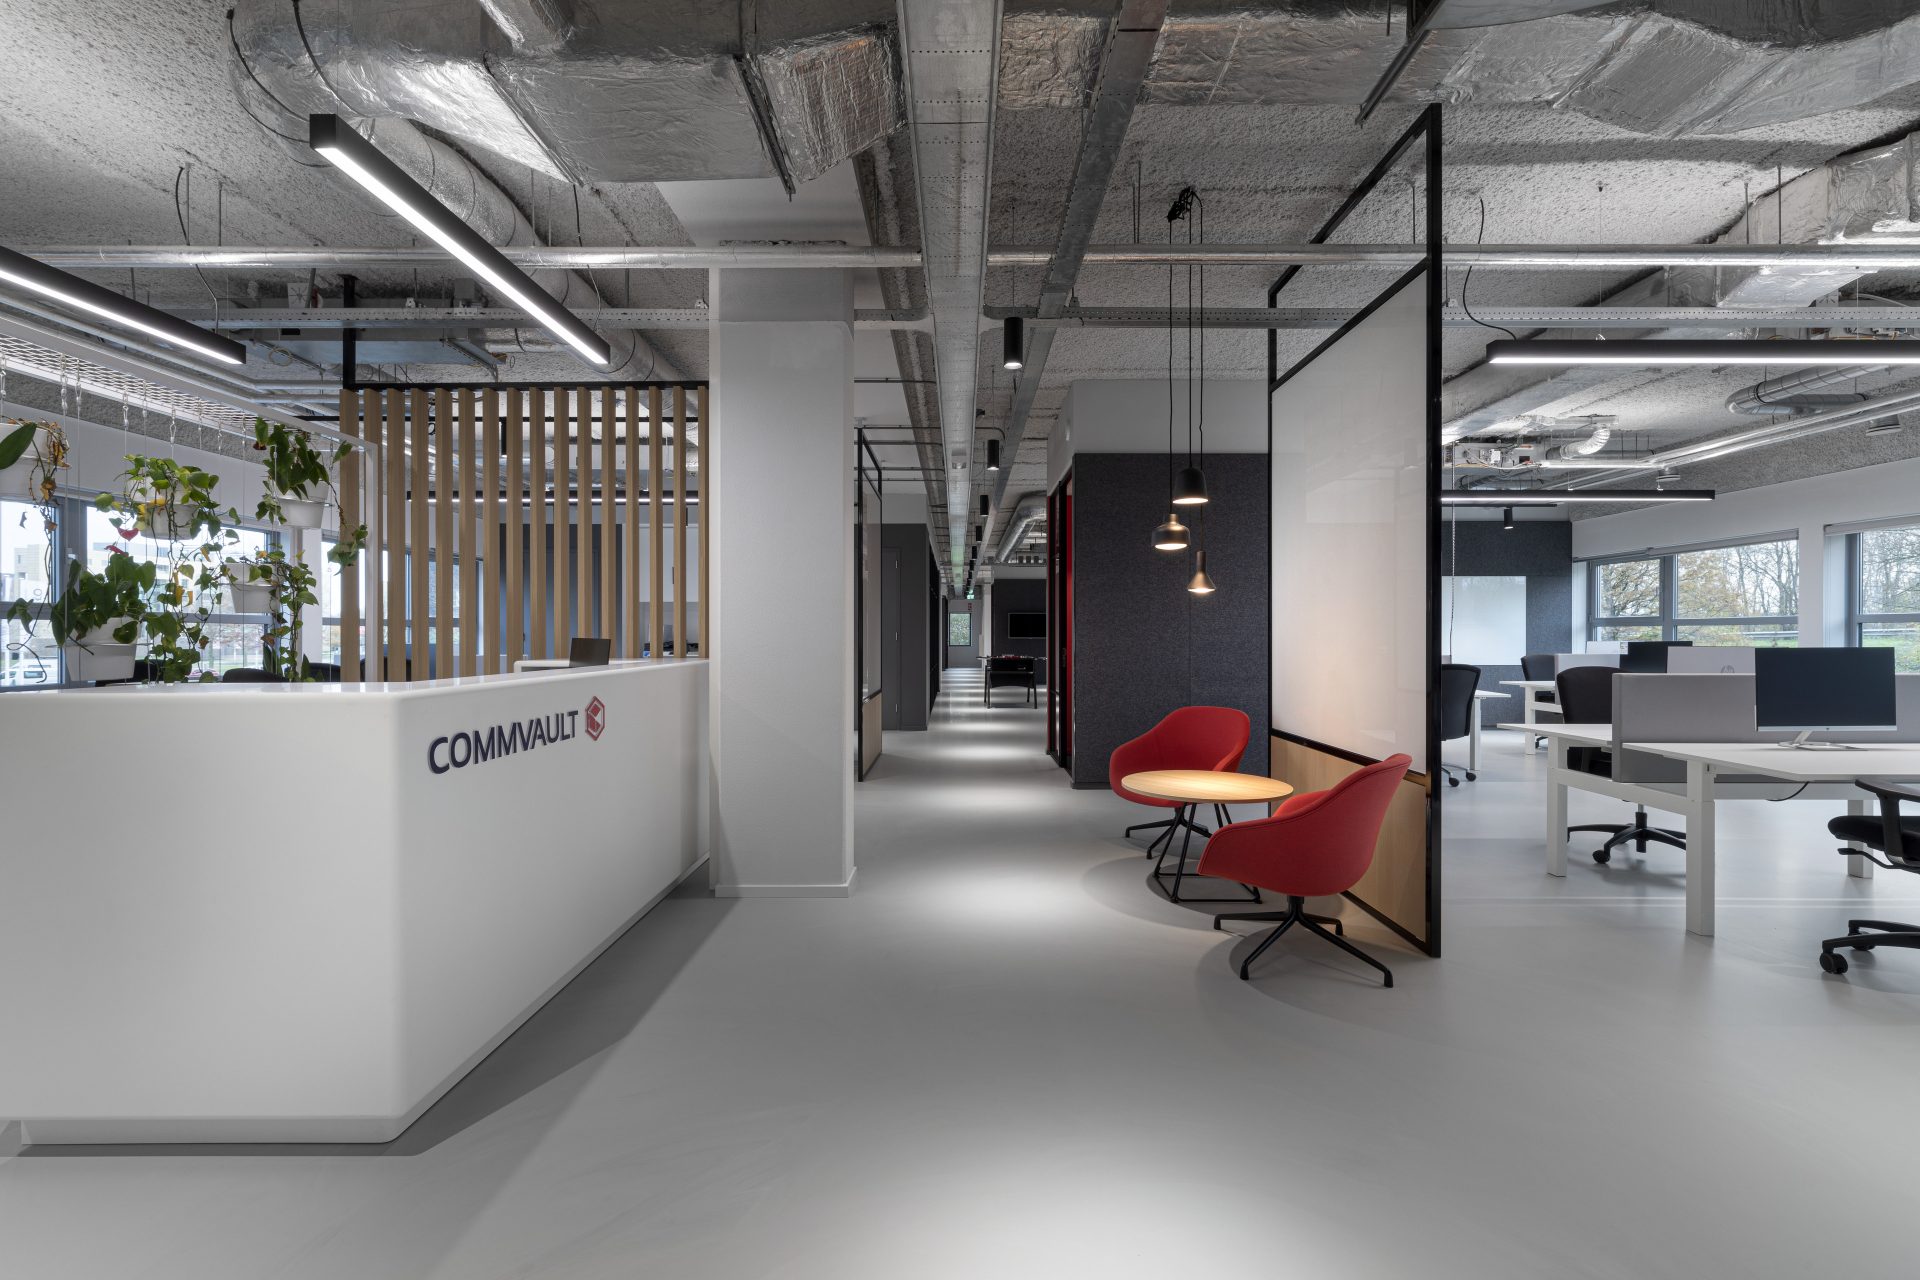 Reception space of the new Commvault offices in Utrecht, the Neterlands